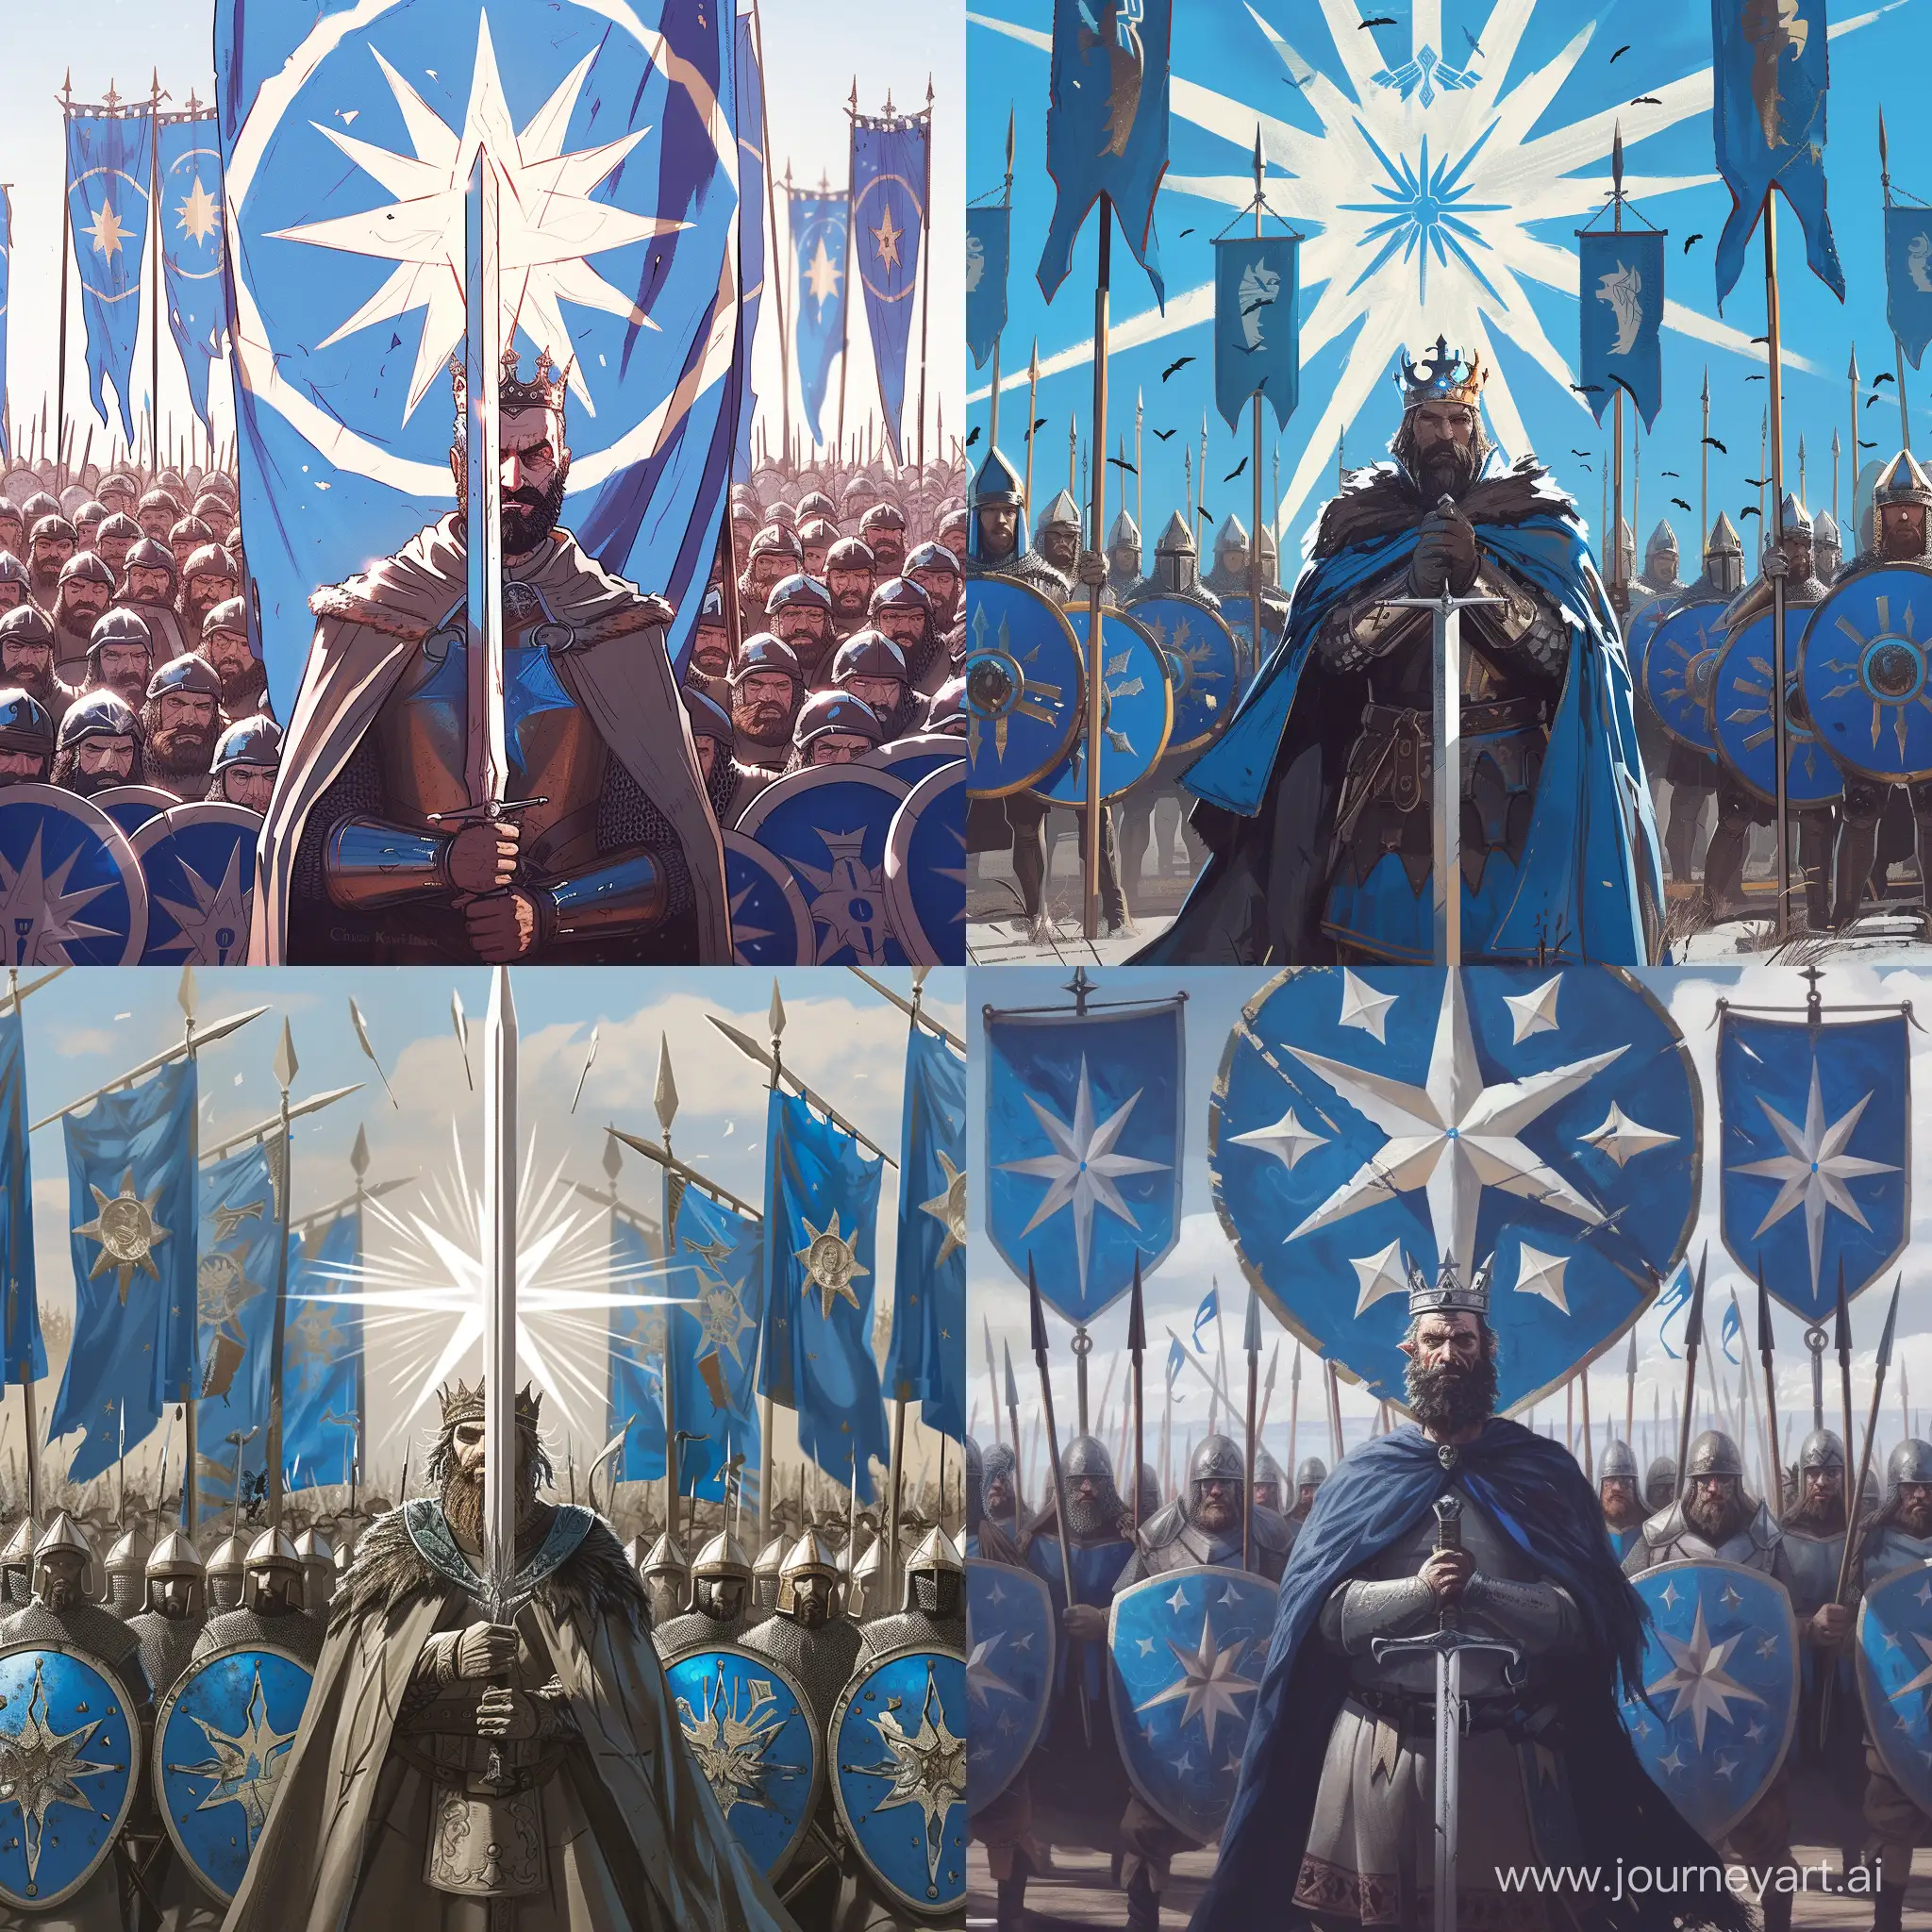 Medieval-King-Leading-Shielded-Army-with-Blue-Banners-Crusader-Kings-3-Style-Art